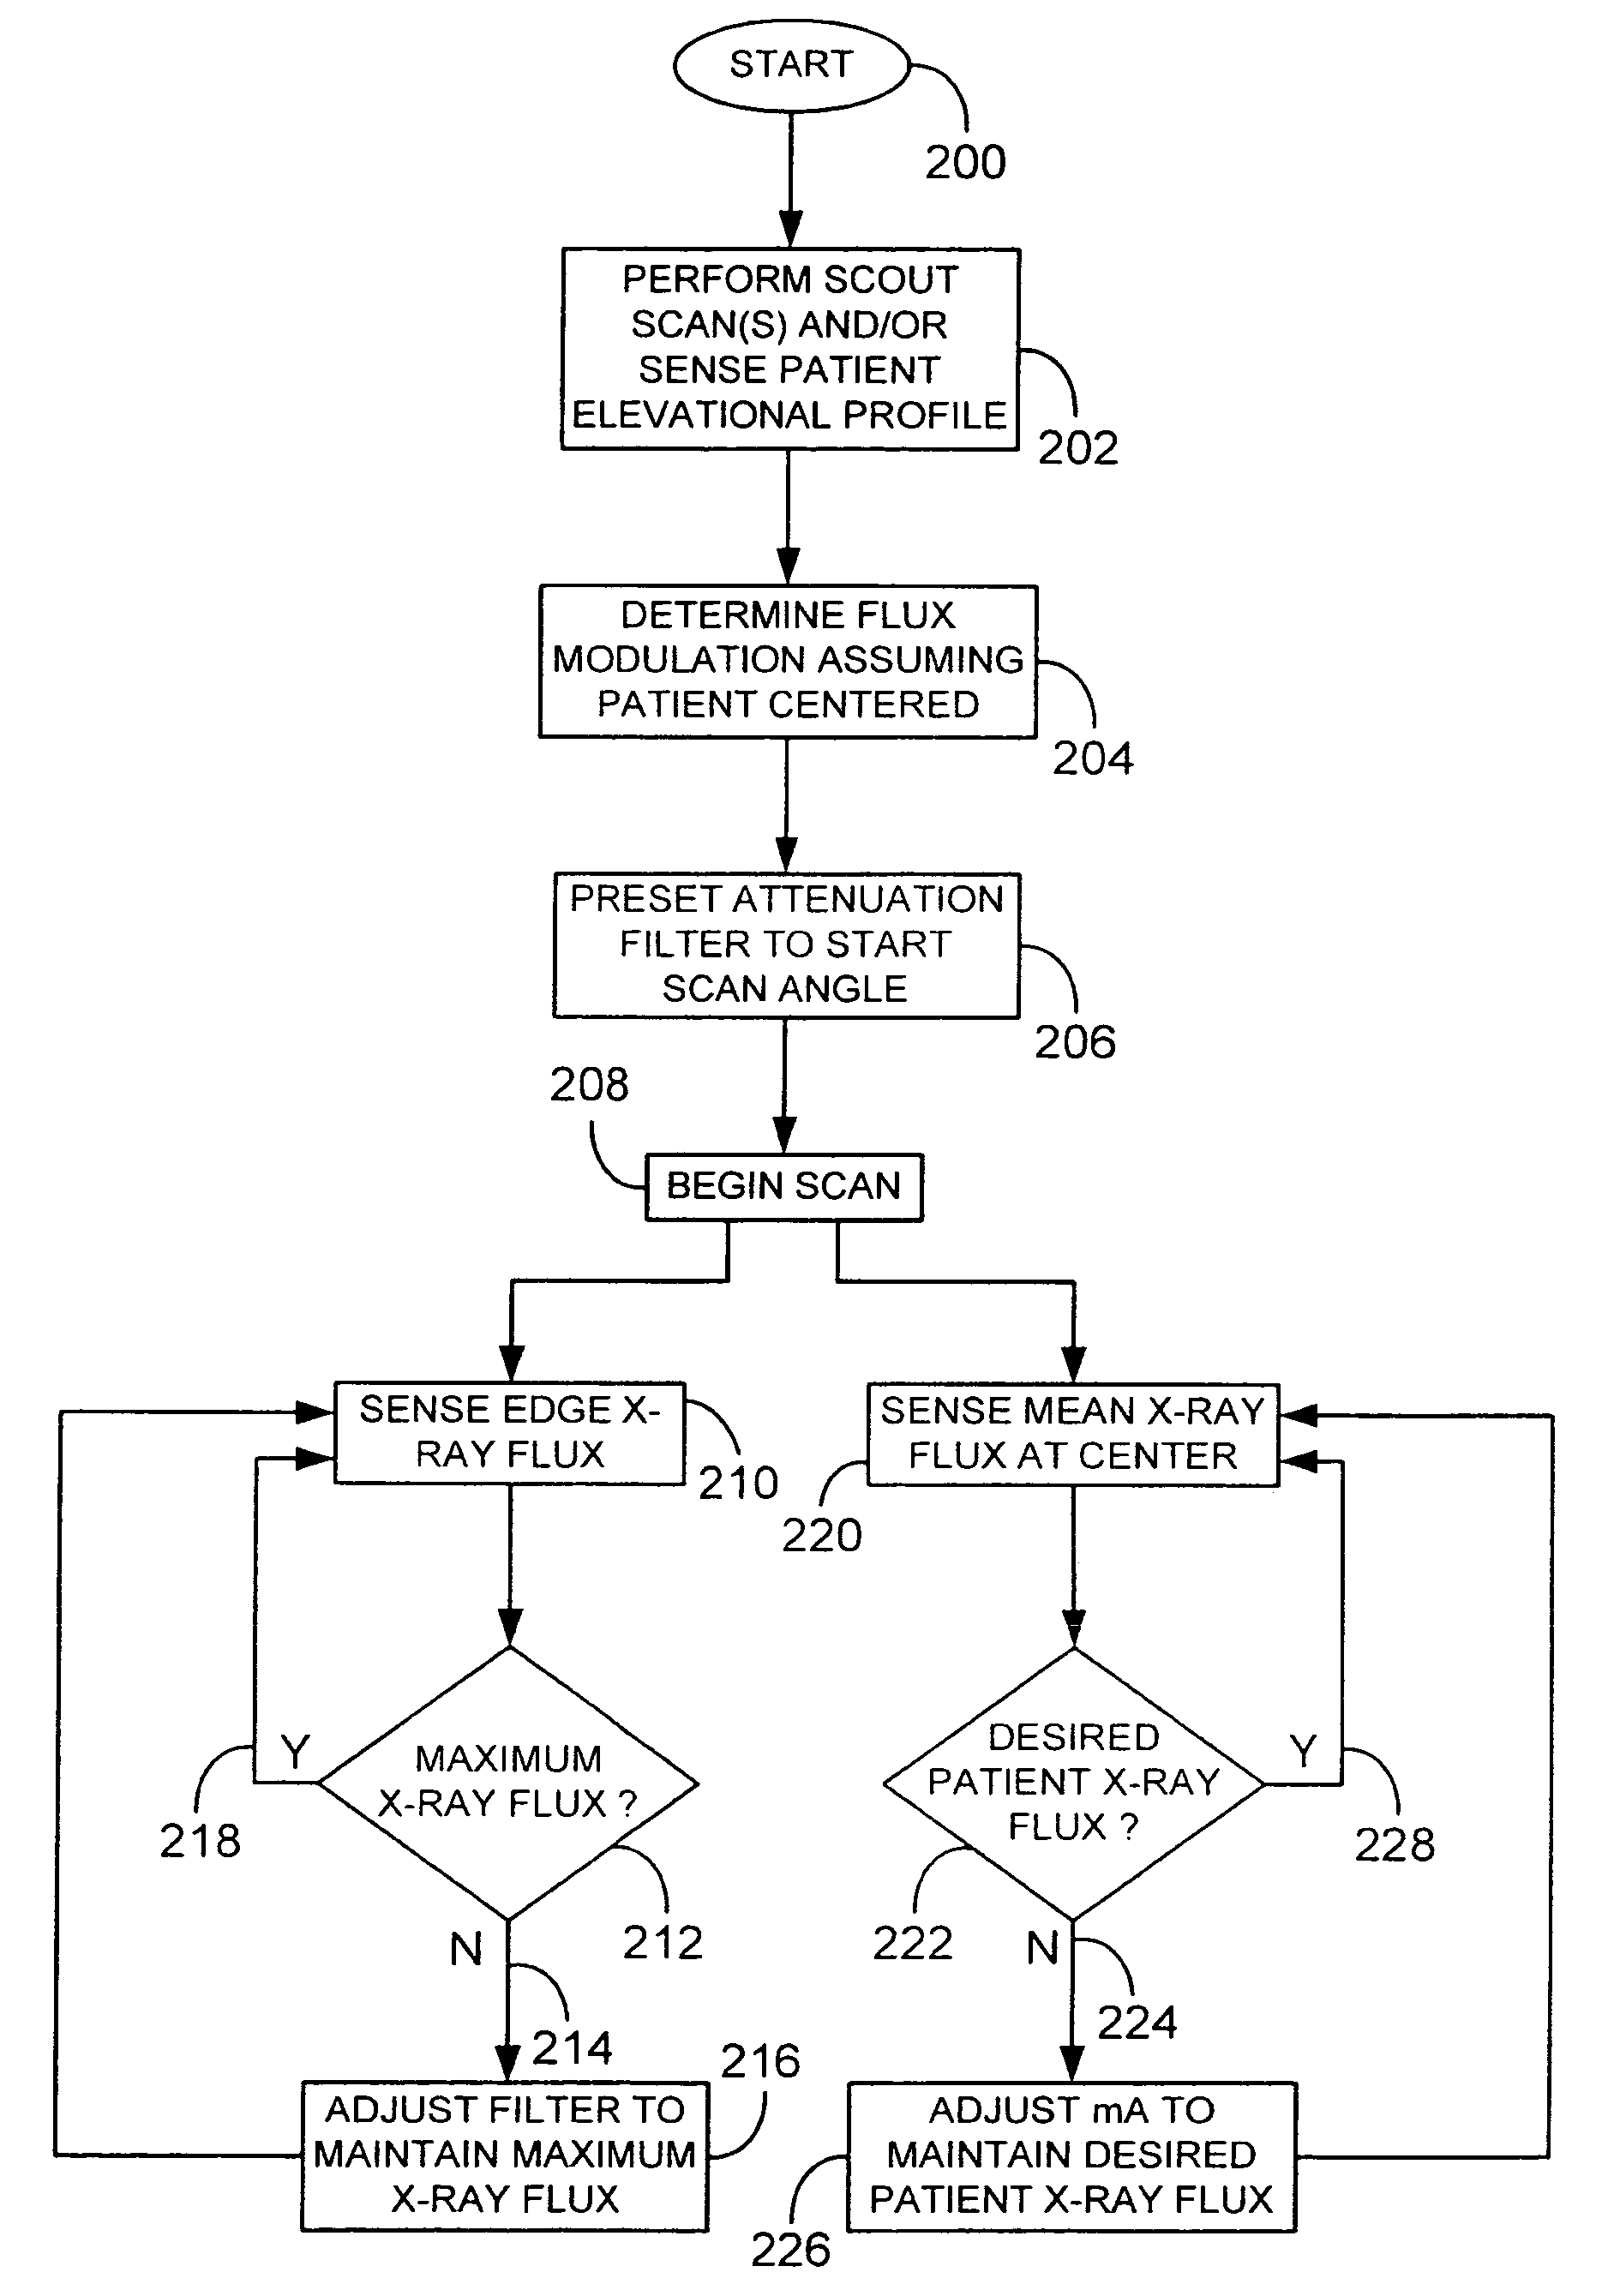 System and method of collecting imaging subject positioning information for x-ray flux control